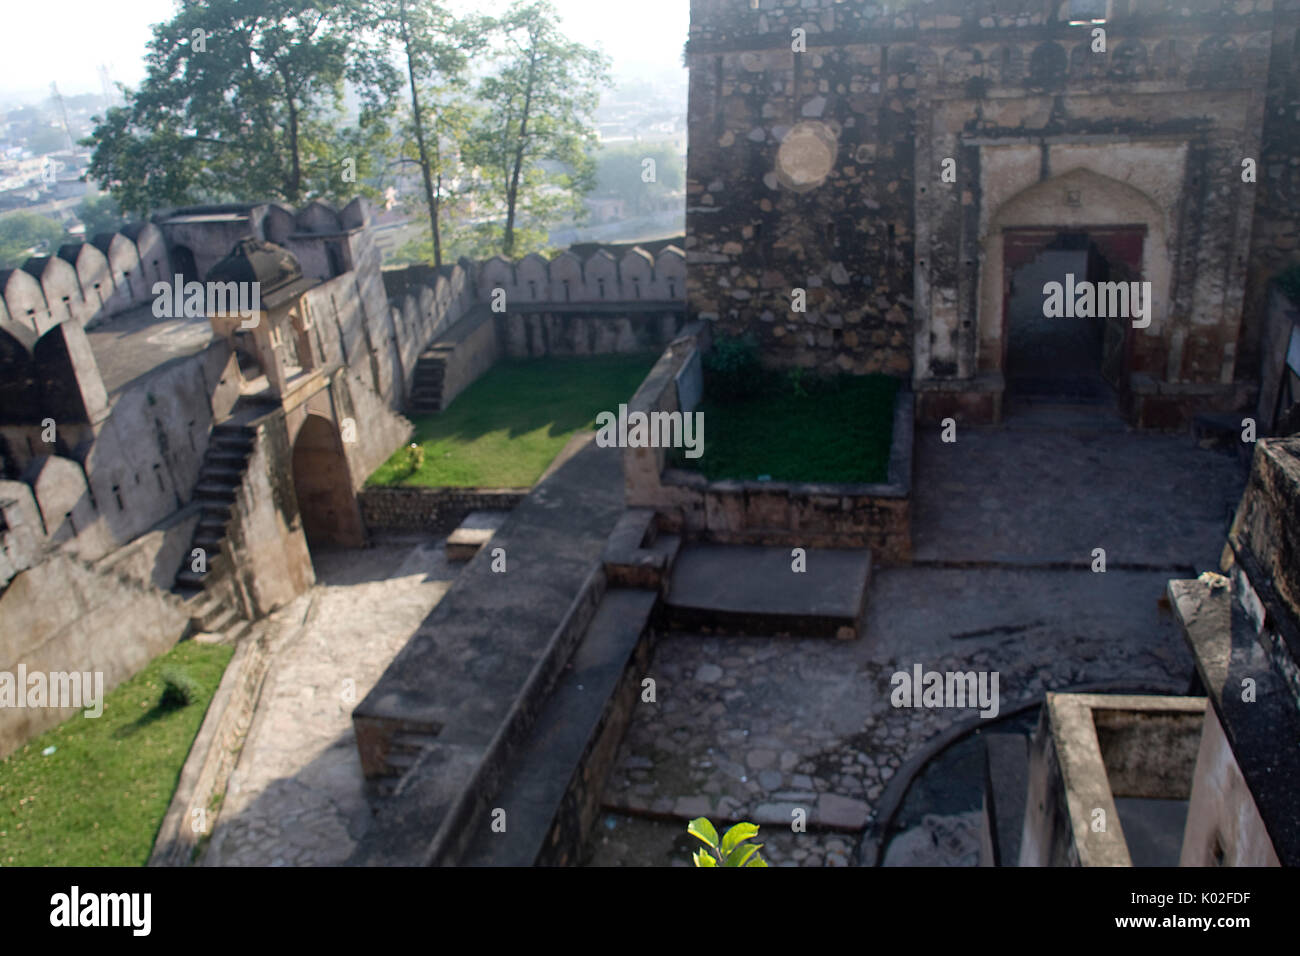 Top view of historical fort at Jhansi, Uttar Pradesh, India, Asia Uploaded on 27jul17 Accepted Stock Photo